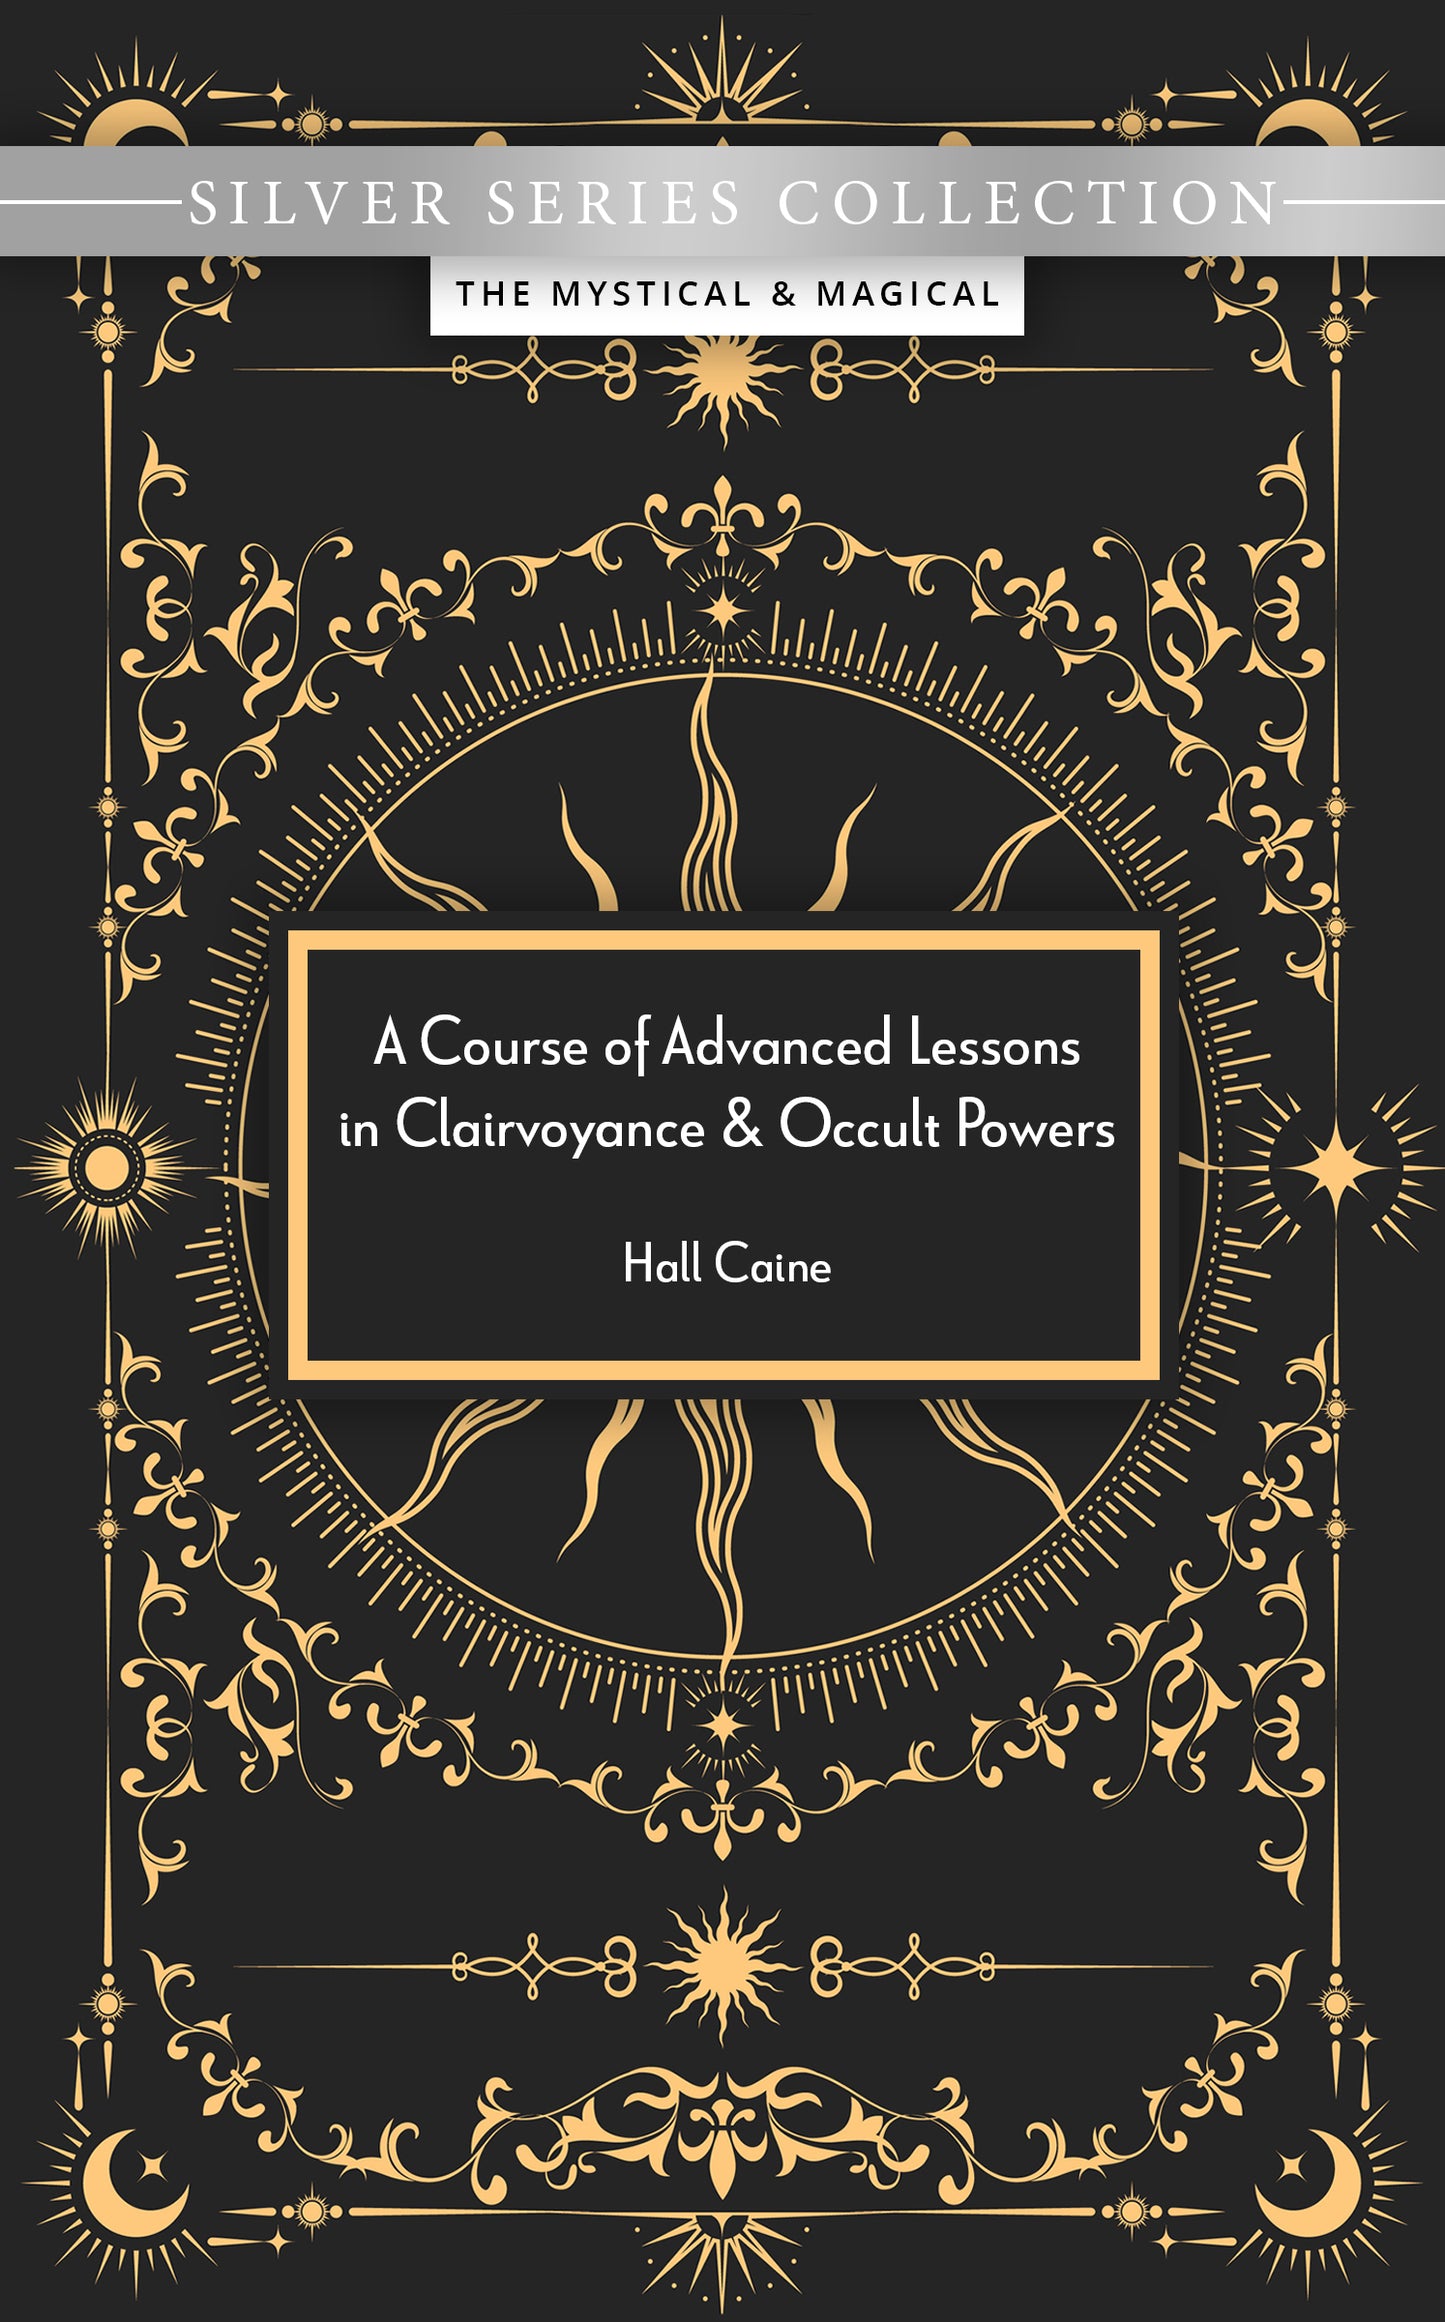 A Course of Advanced Lessons in Clairvoyance & Occult Powers